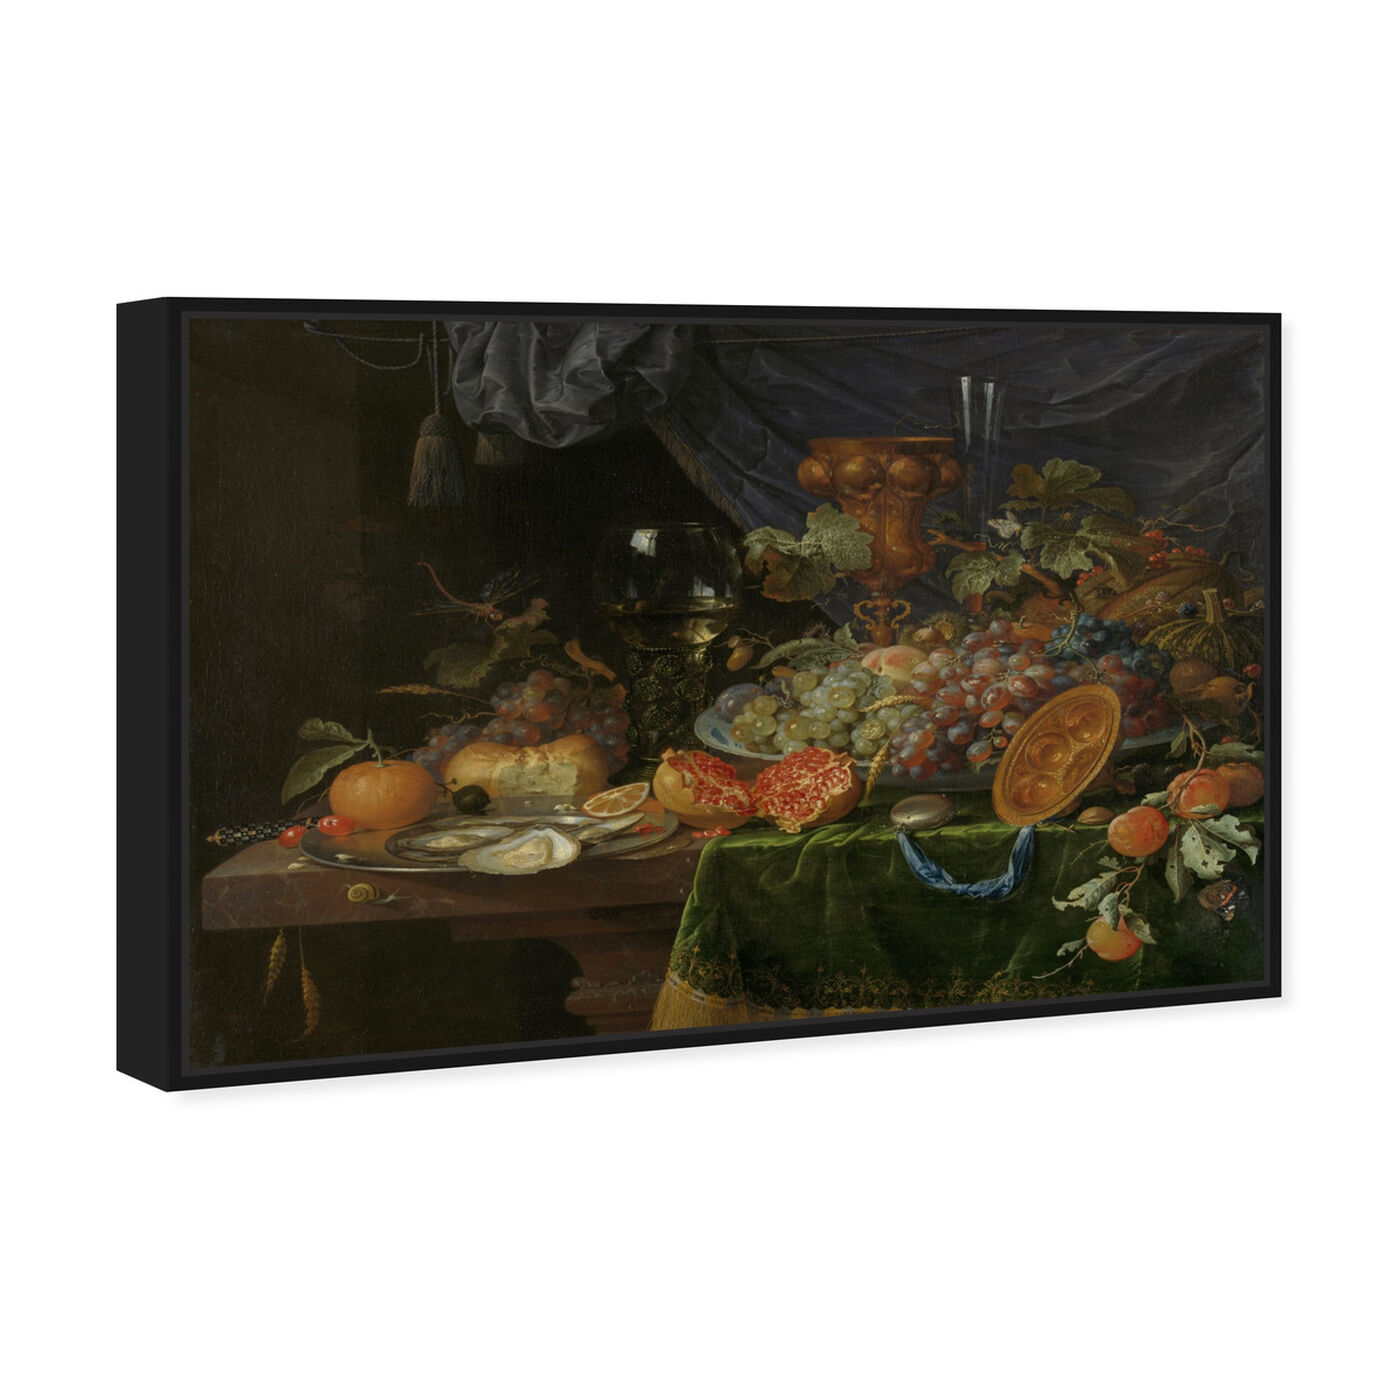 Angled view of Fruit Arrangement - The Art Cabinet featuring classic and figurative and realism art.